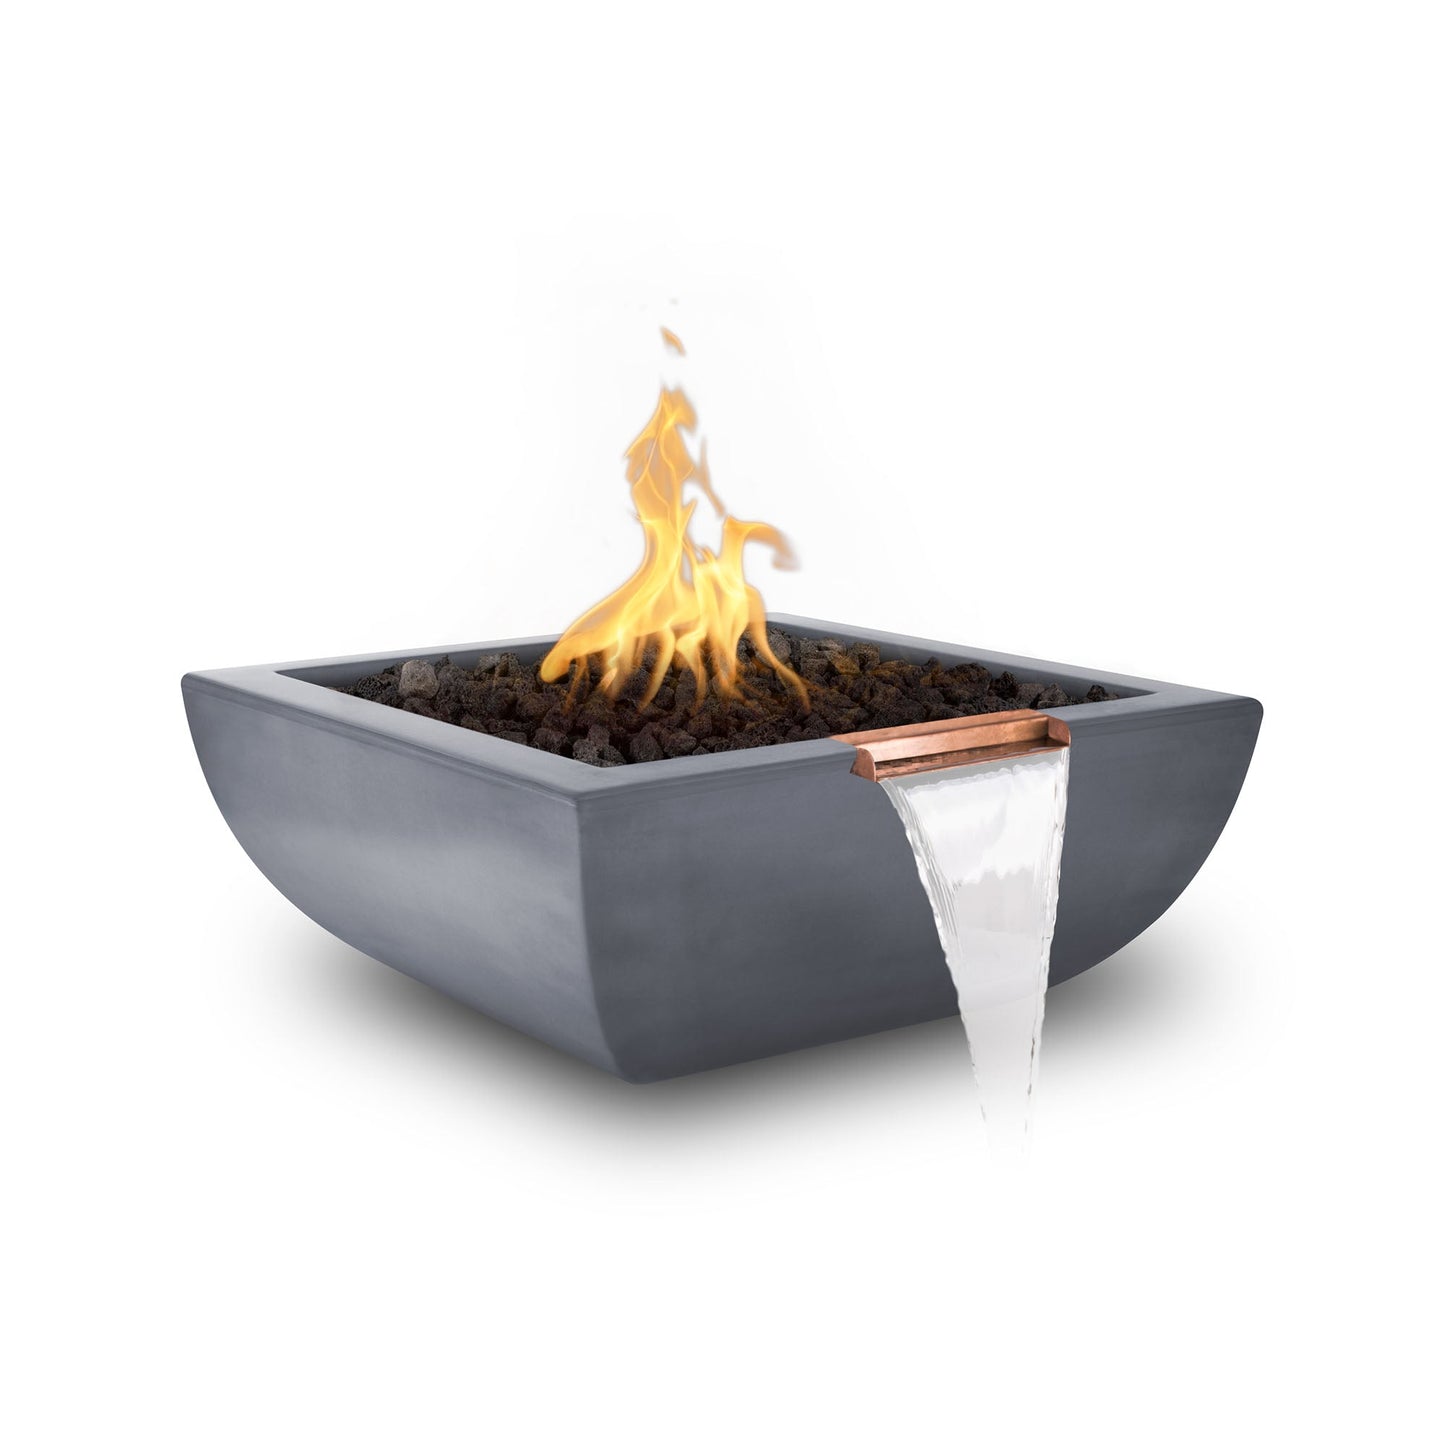 The Outdoor Plus Square Avalon 36" Gray GFRC Concrete Natural Gas Fire & Water Bowl with Match Lit with Flame Sense Ignition